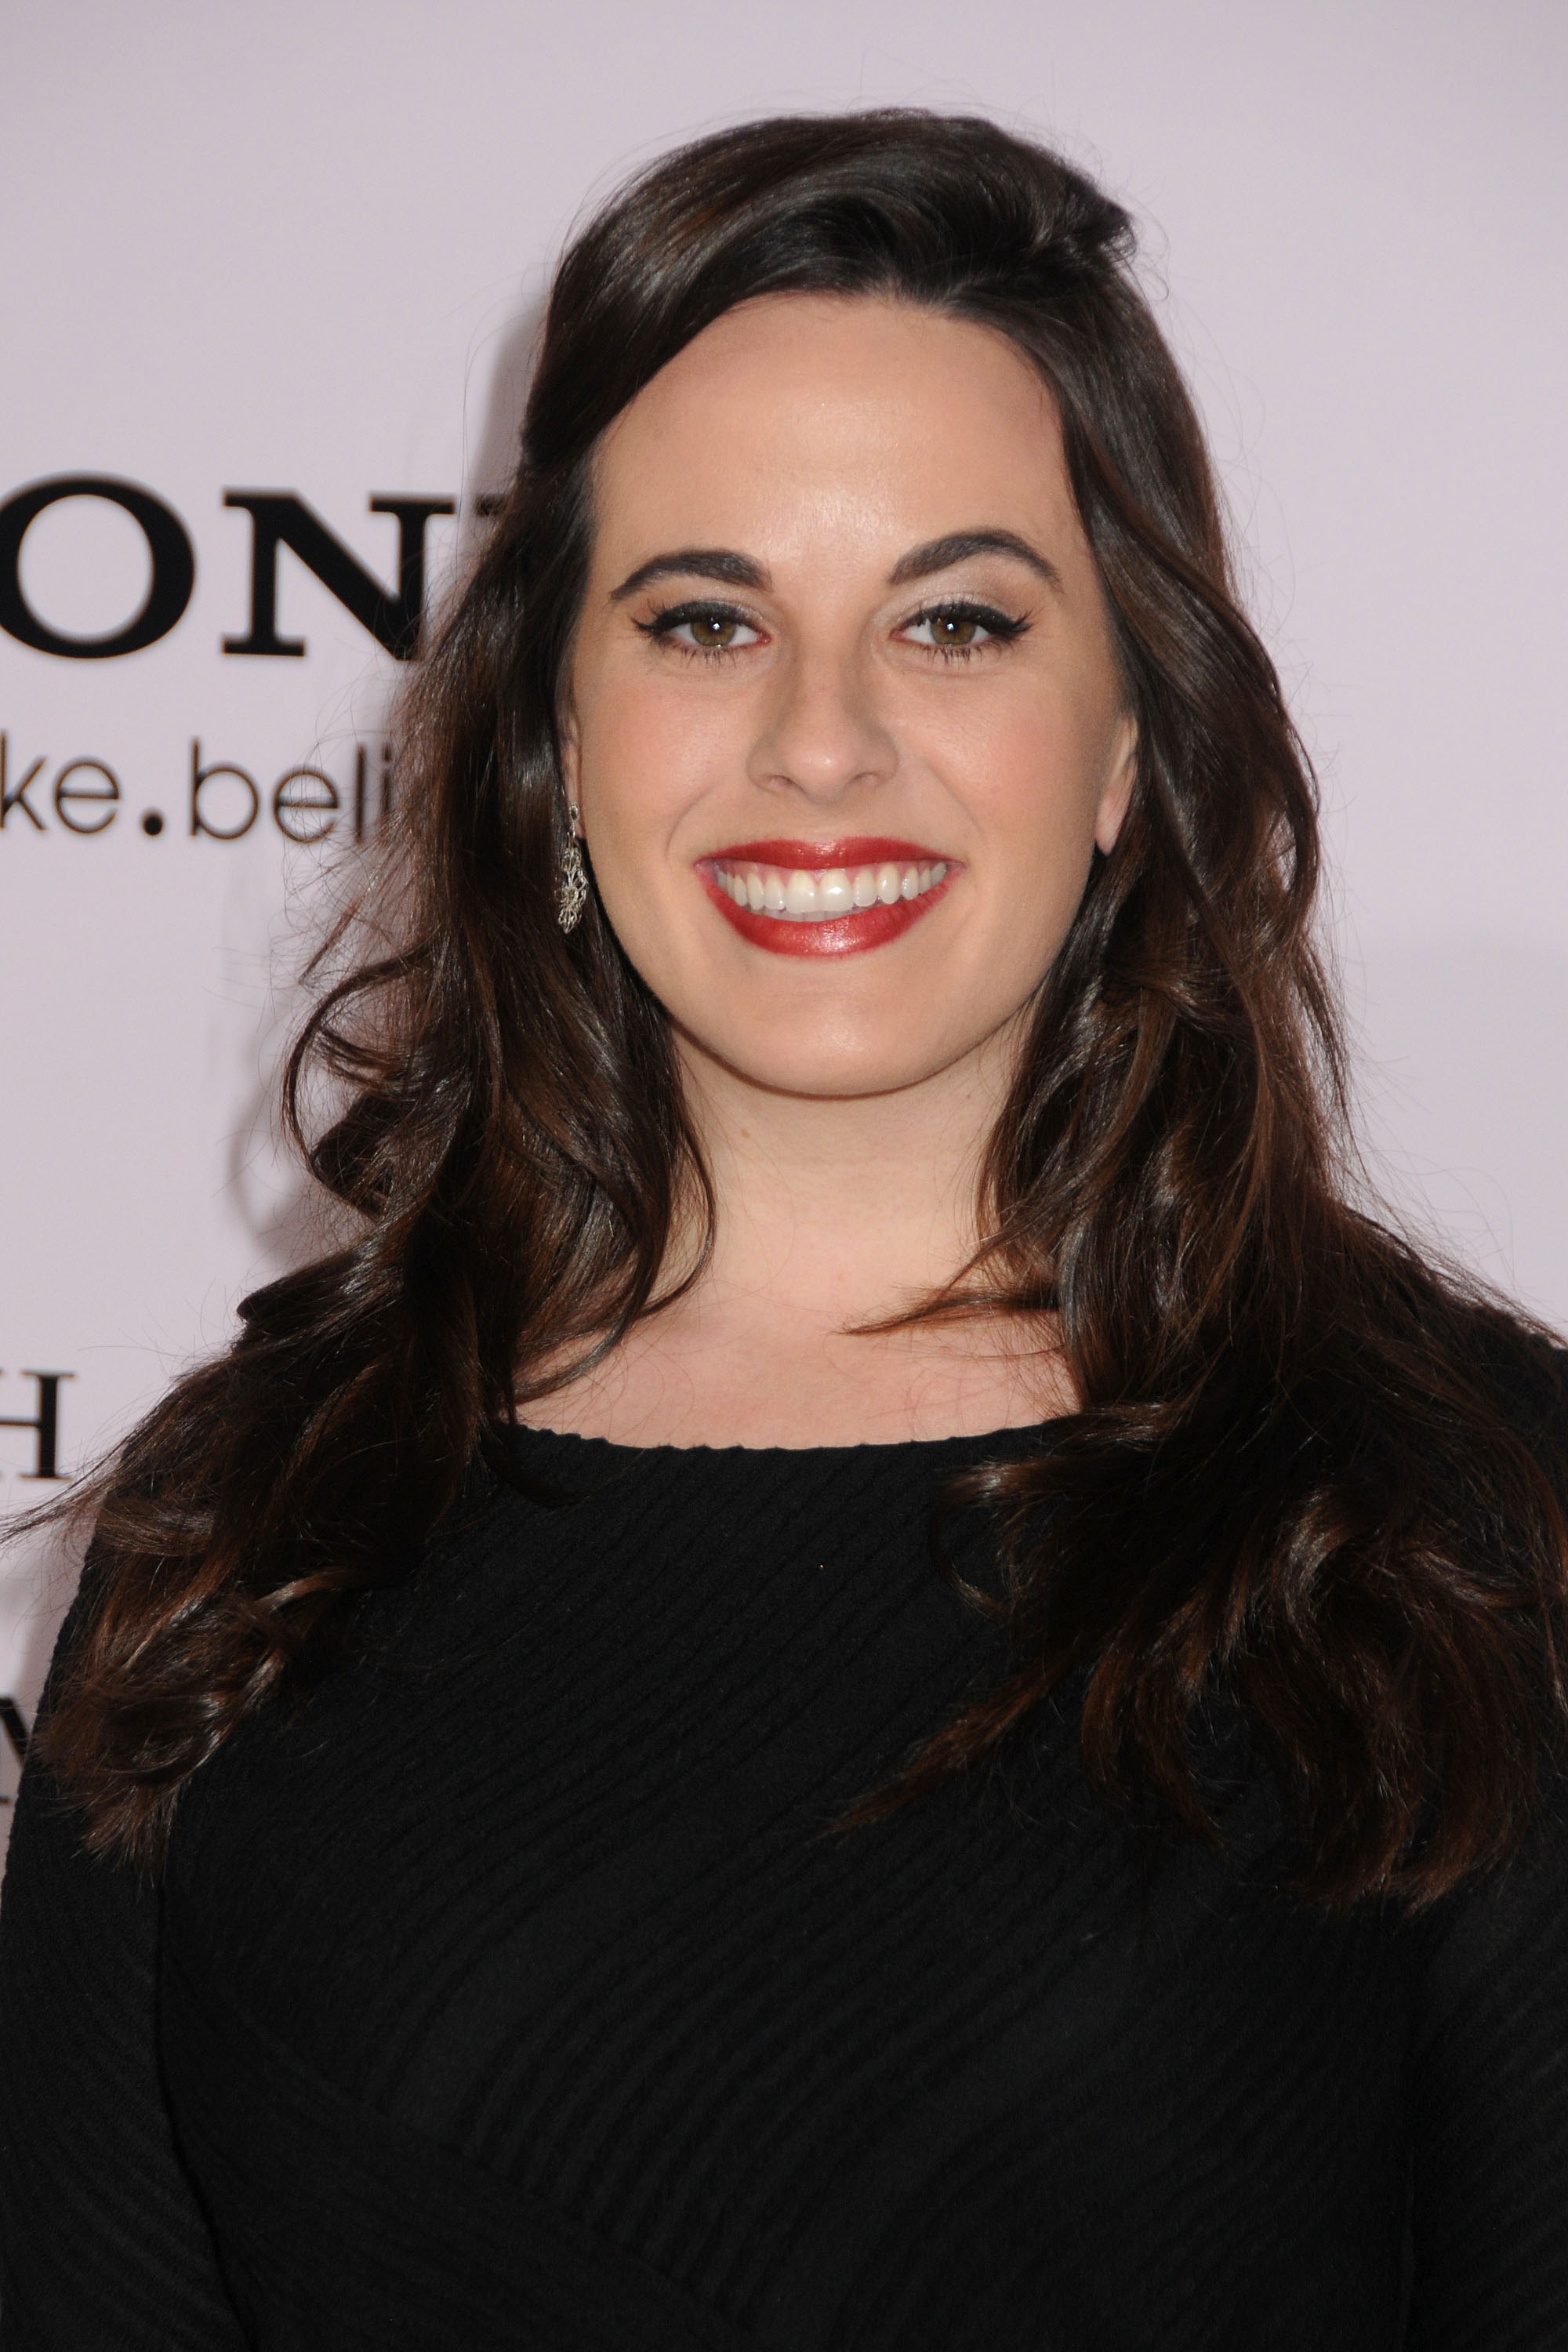 Serena Lorien arrives at Sony Pictures' 